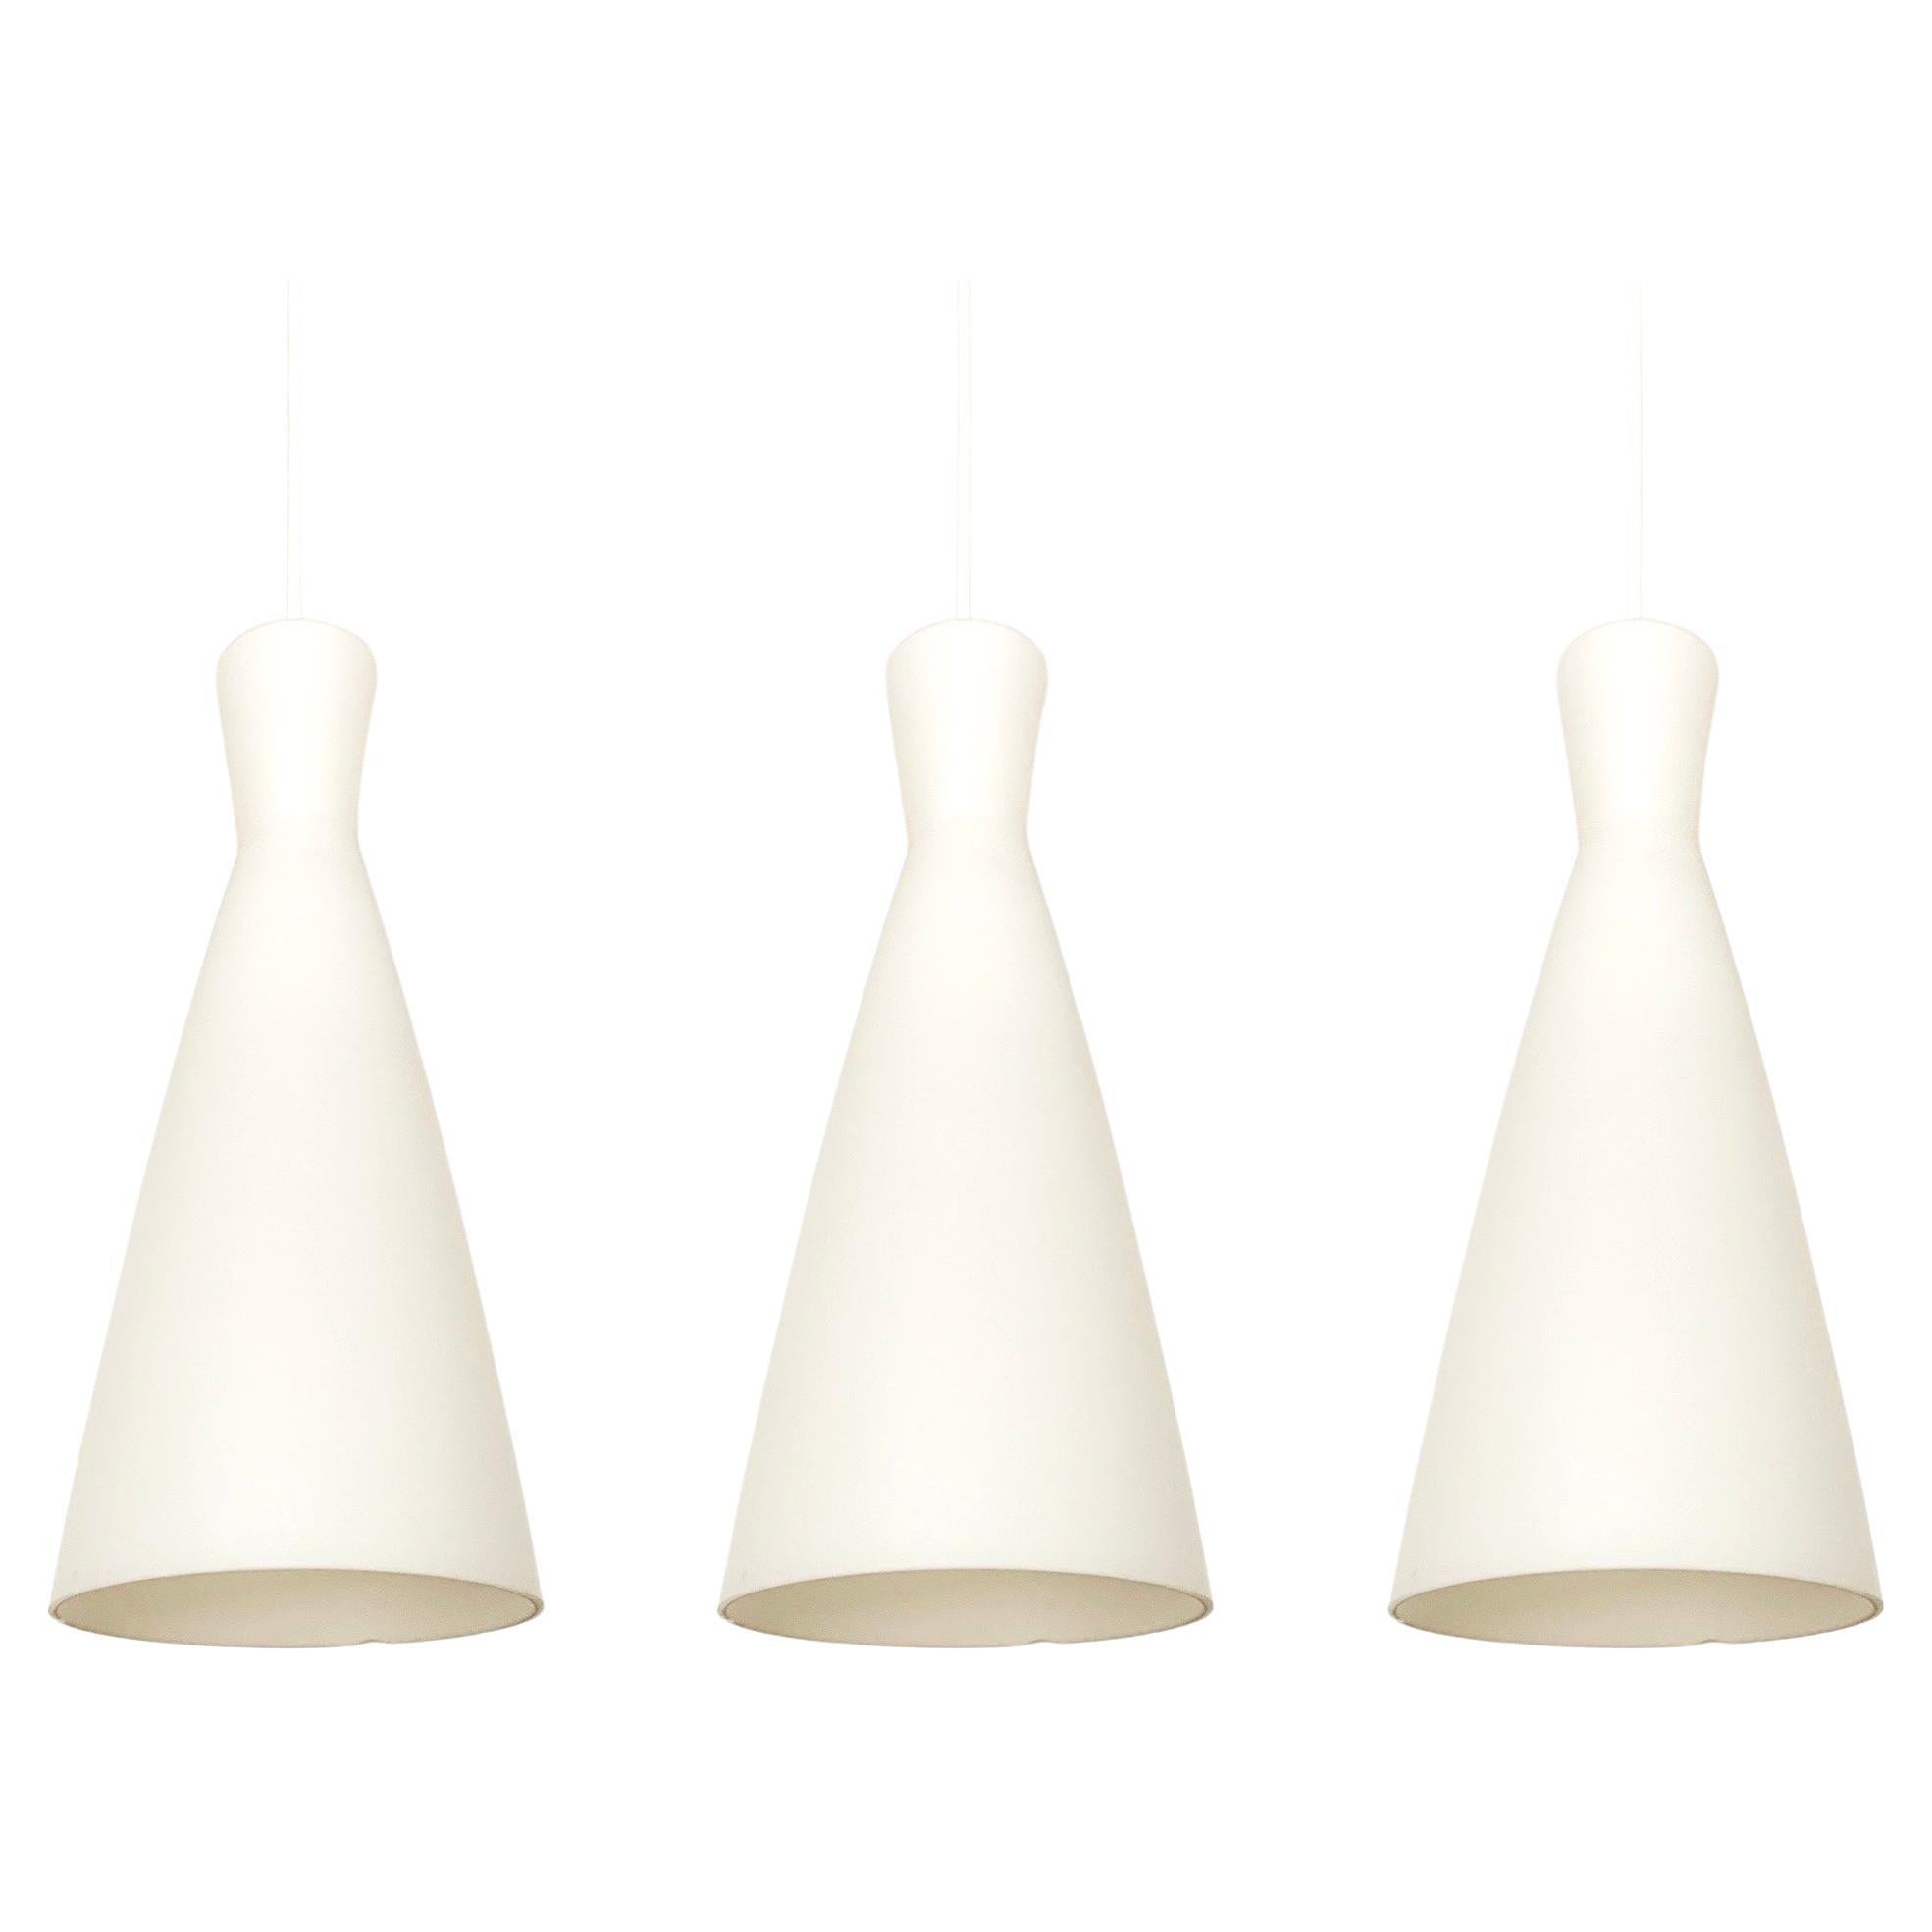 Set of 3 Opaline Pendant Lamps by Aloys Gangkofner for Peill and Putzler